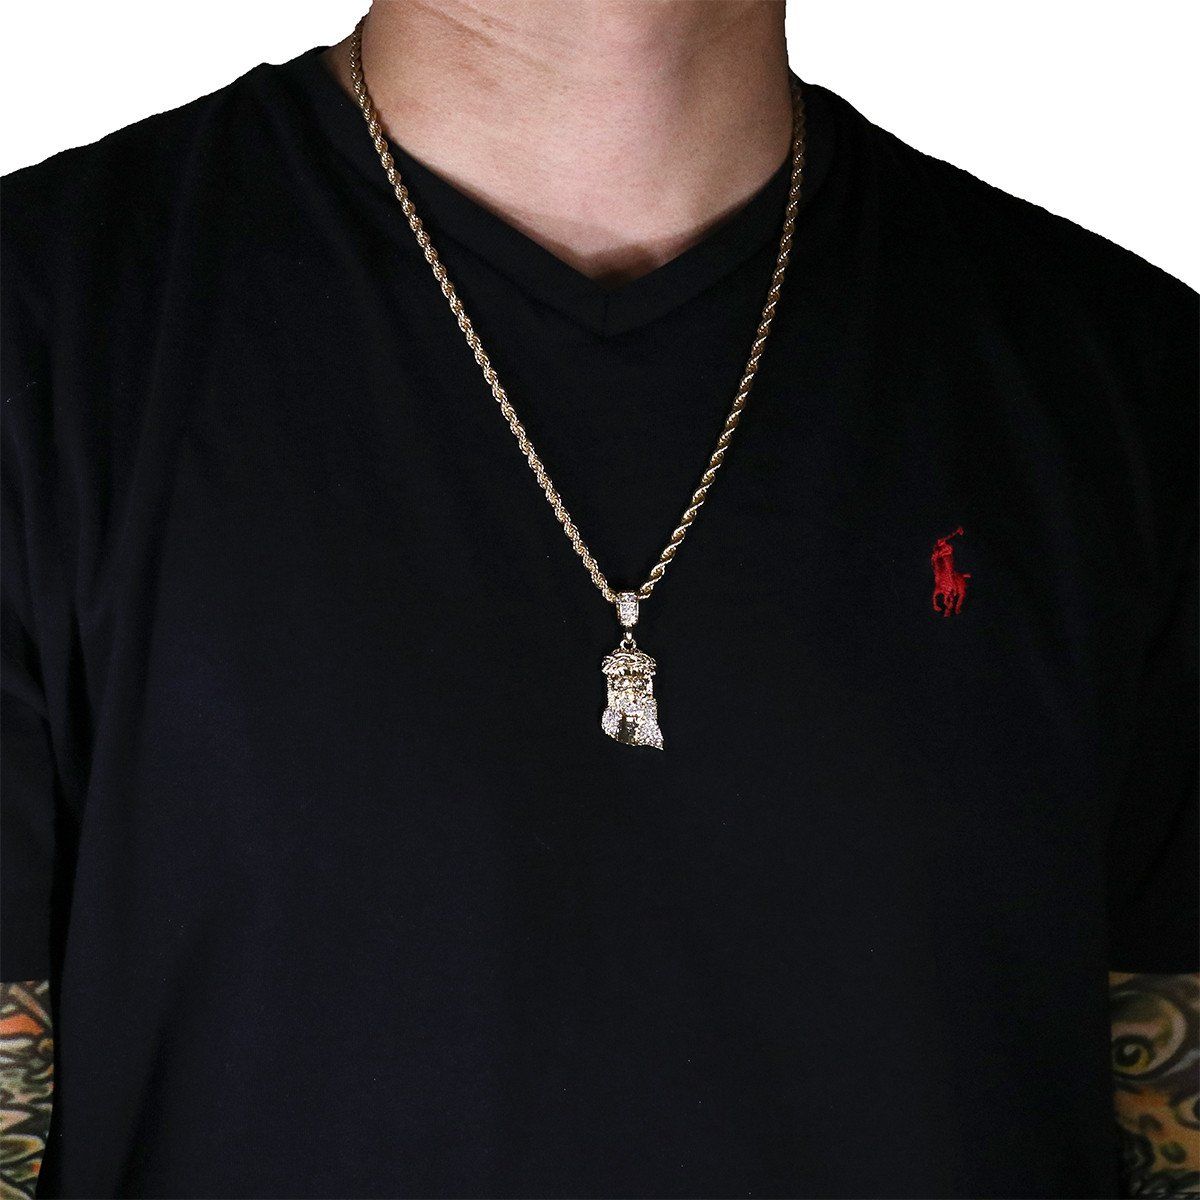 JESUS PENDANT WITH GOLD ROPE CHAIN